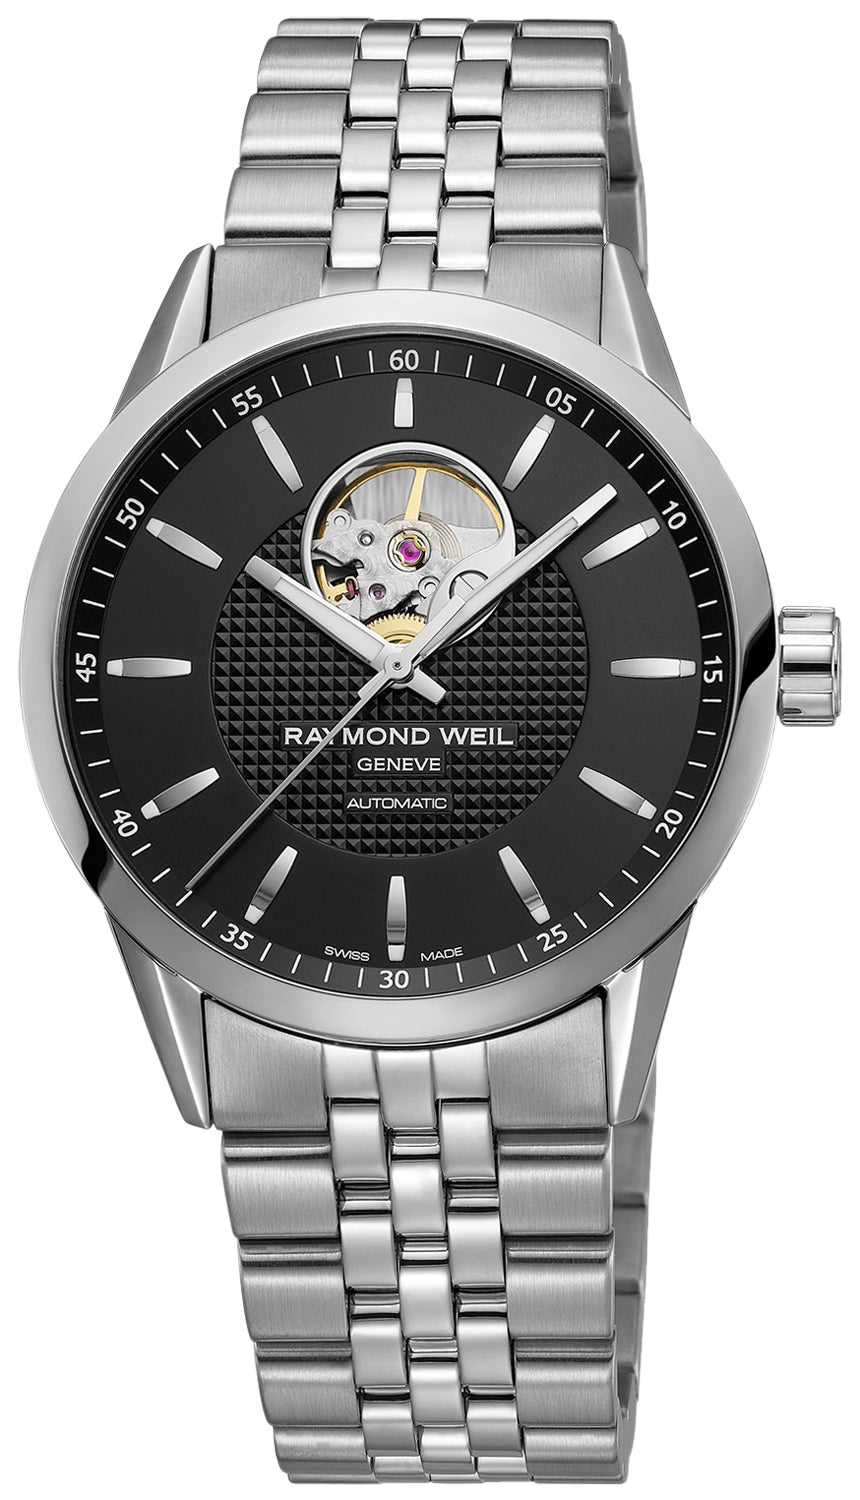 update alt-text with template Watches - Mens-Raymond Weil-2710-ST-20021-40 - 45 mm, black, Freelancer, mens, menswatches, new arrivals, open heart, Raymond Weil, round, stainless steel band, stainless steel case, swiss automatic, watches-Watches & Beyond